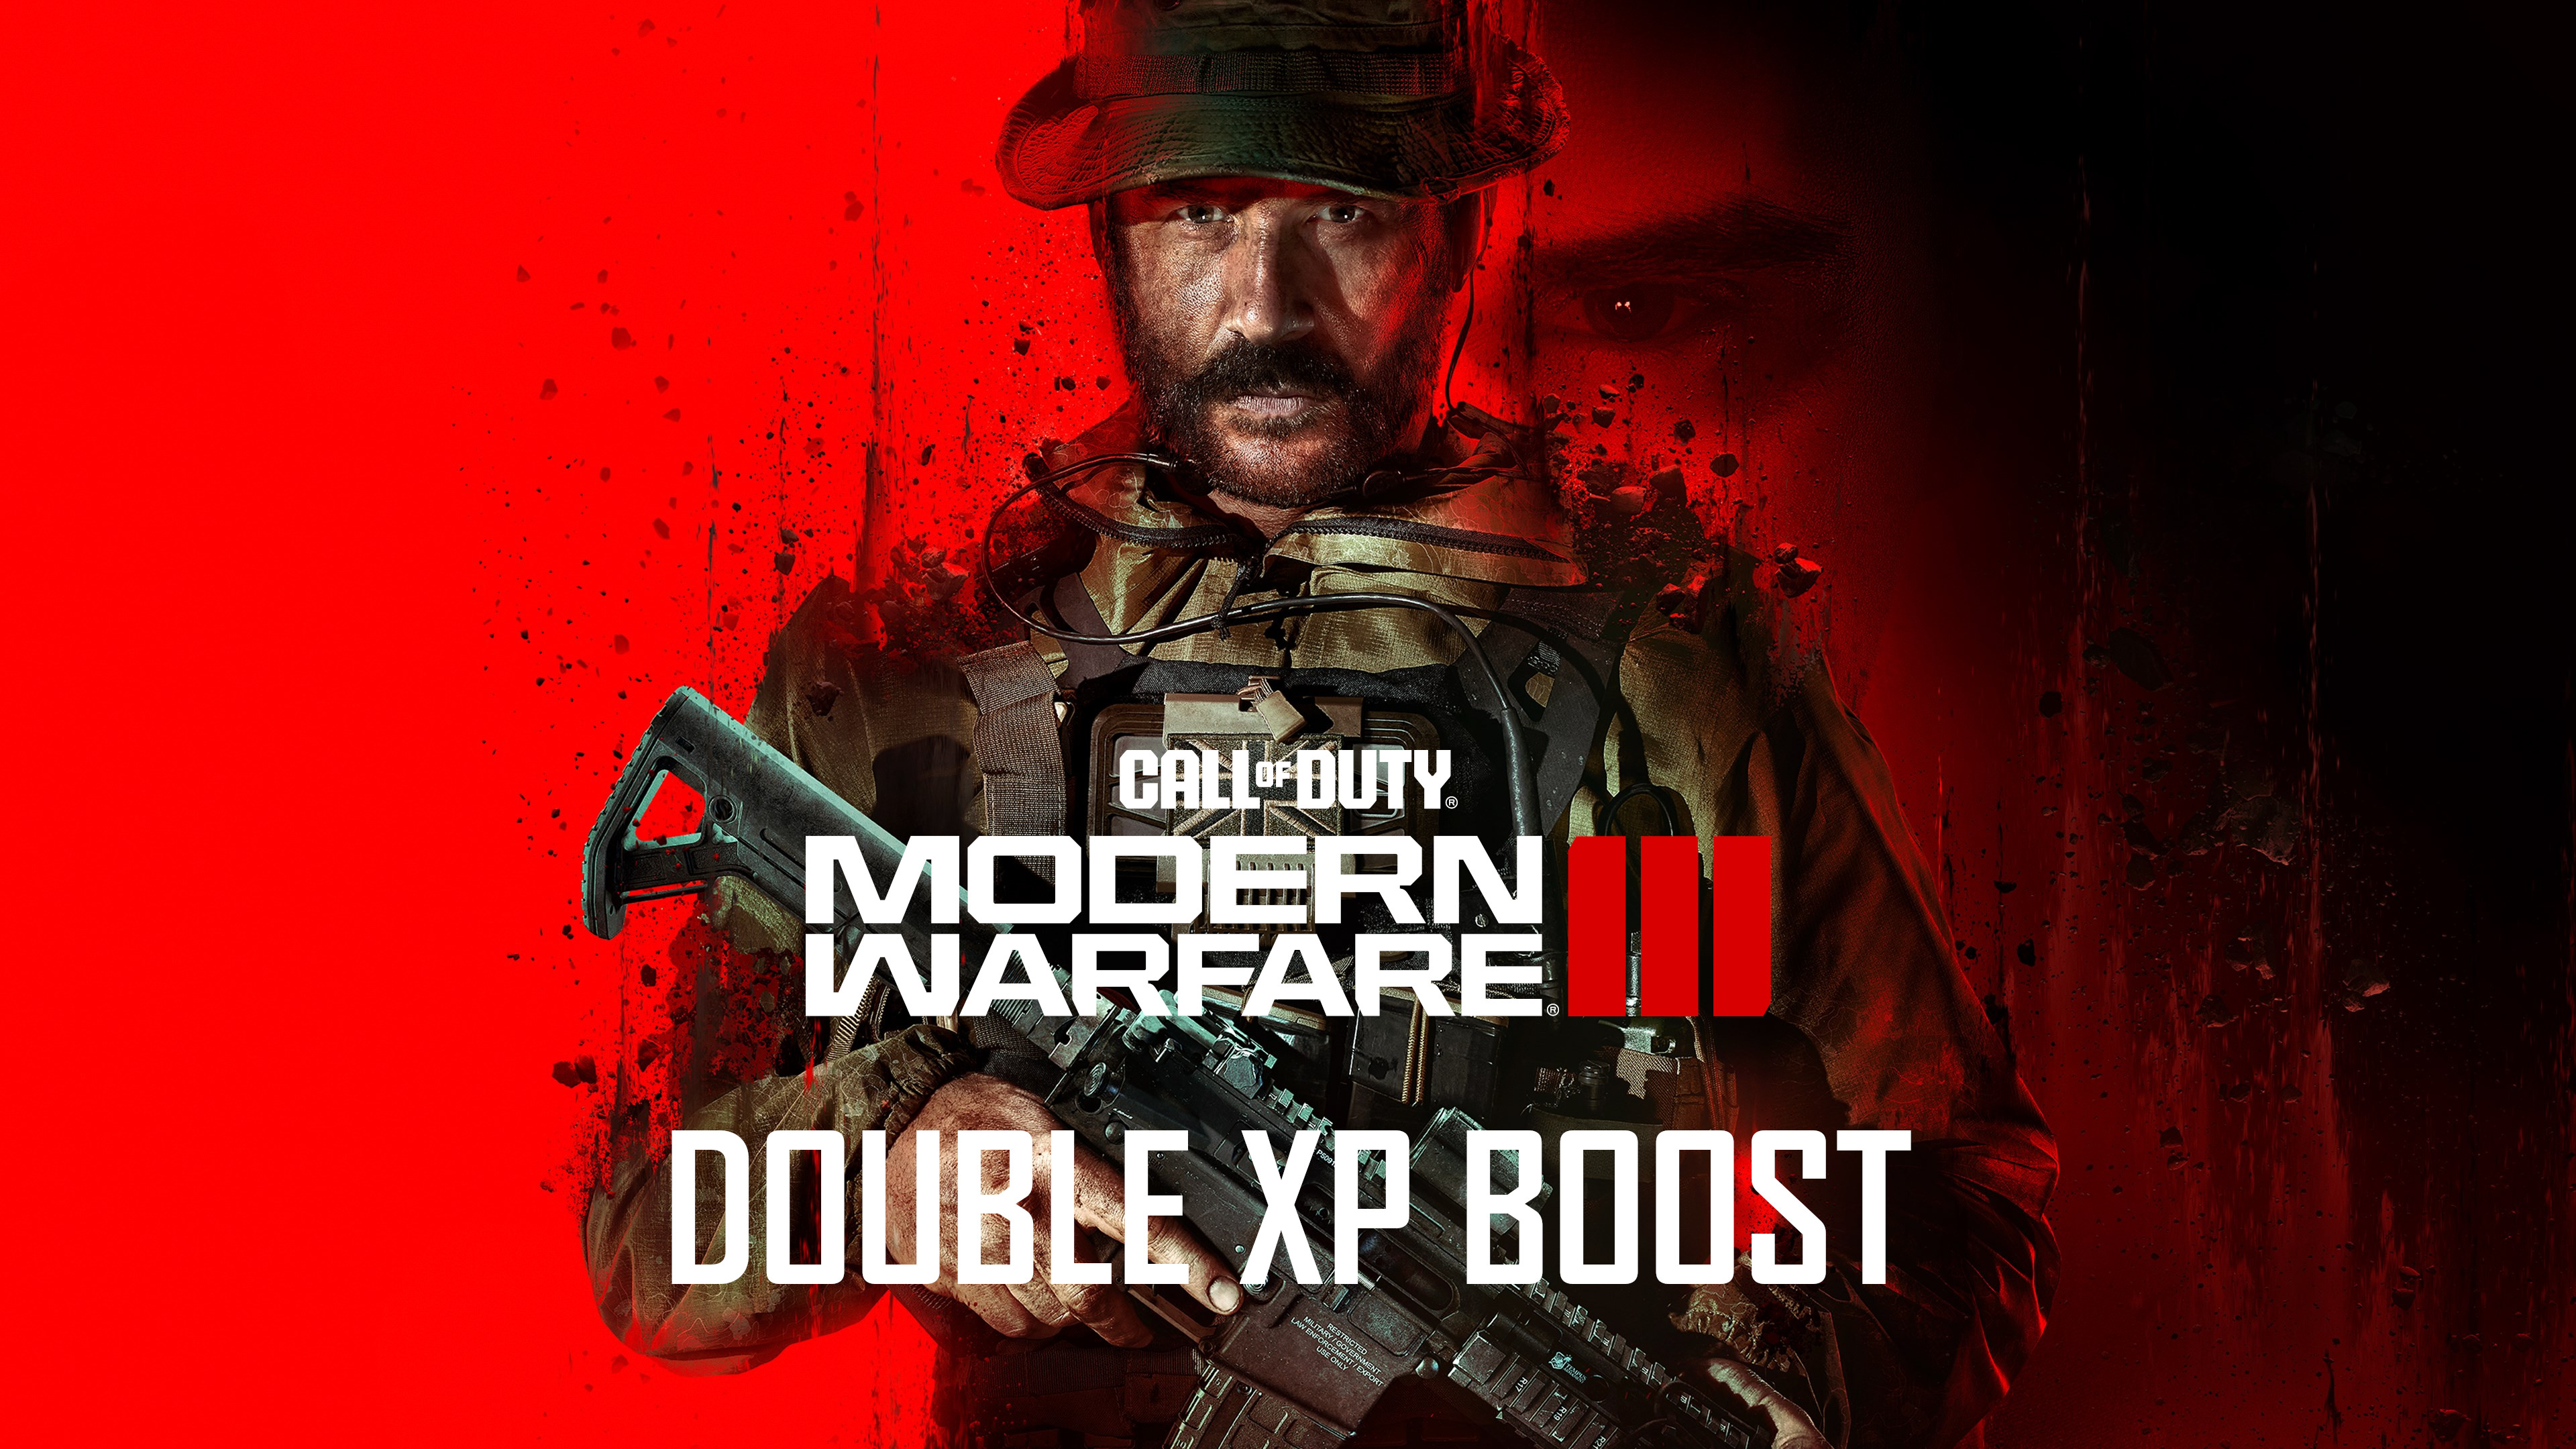 Call Of Duty: Modern Warfare III - 2 Hours Double XP Boost PC/PS4/PS5/XBOX One/Series X,S CD Key